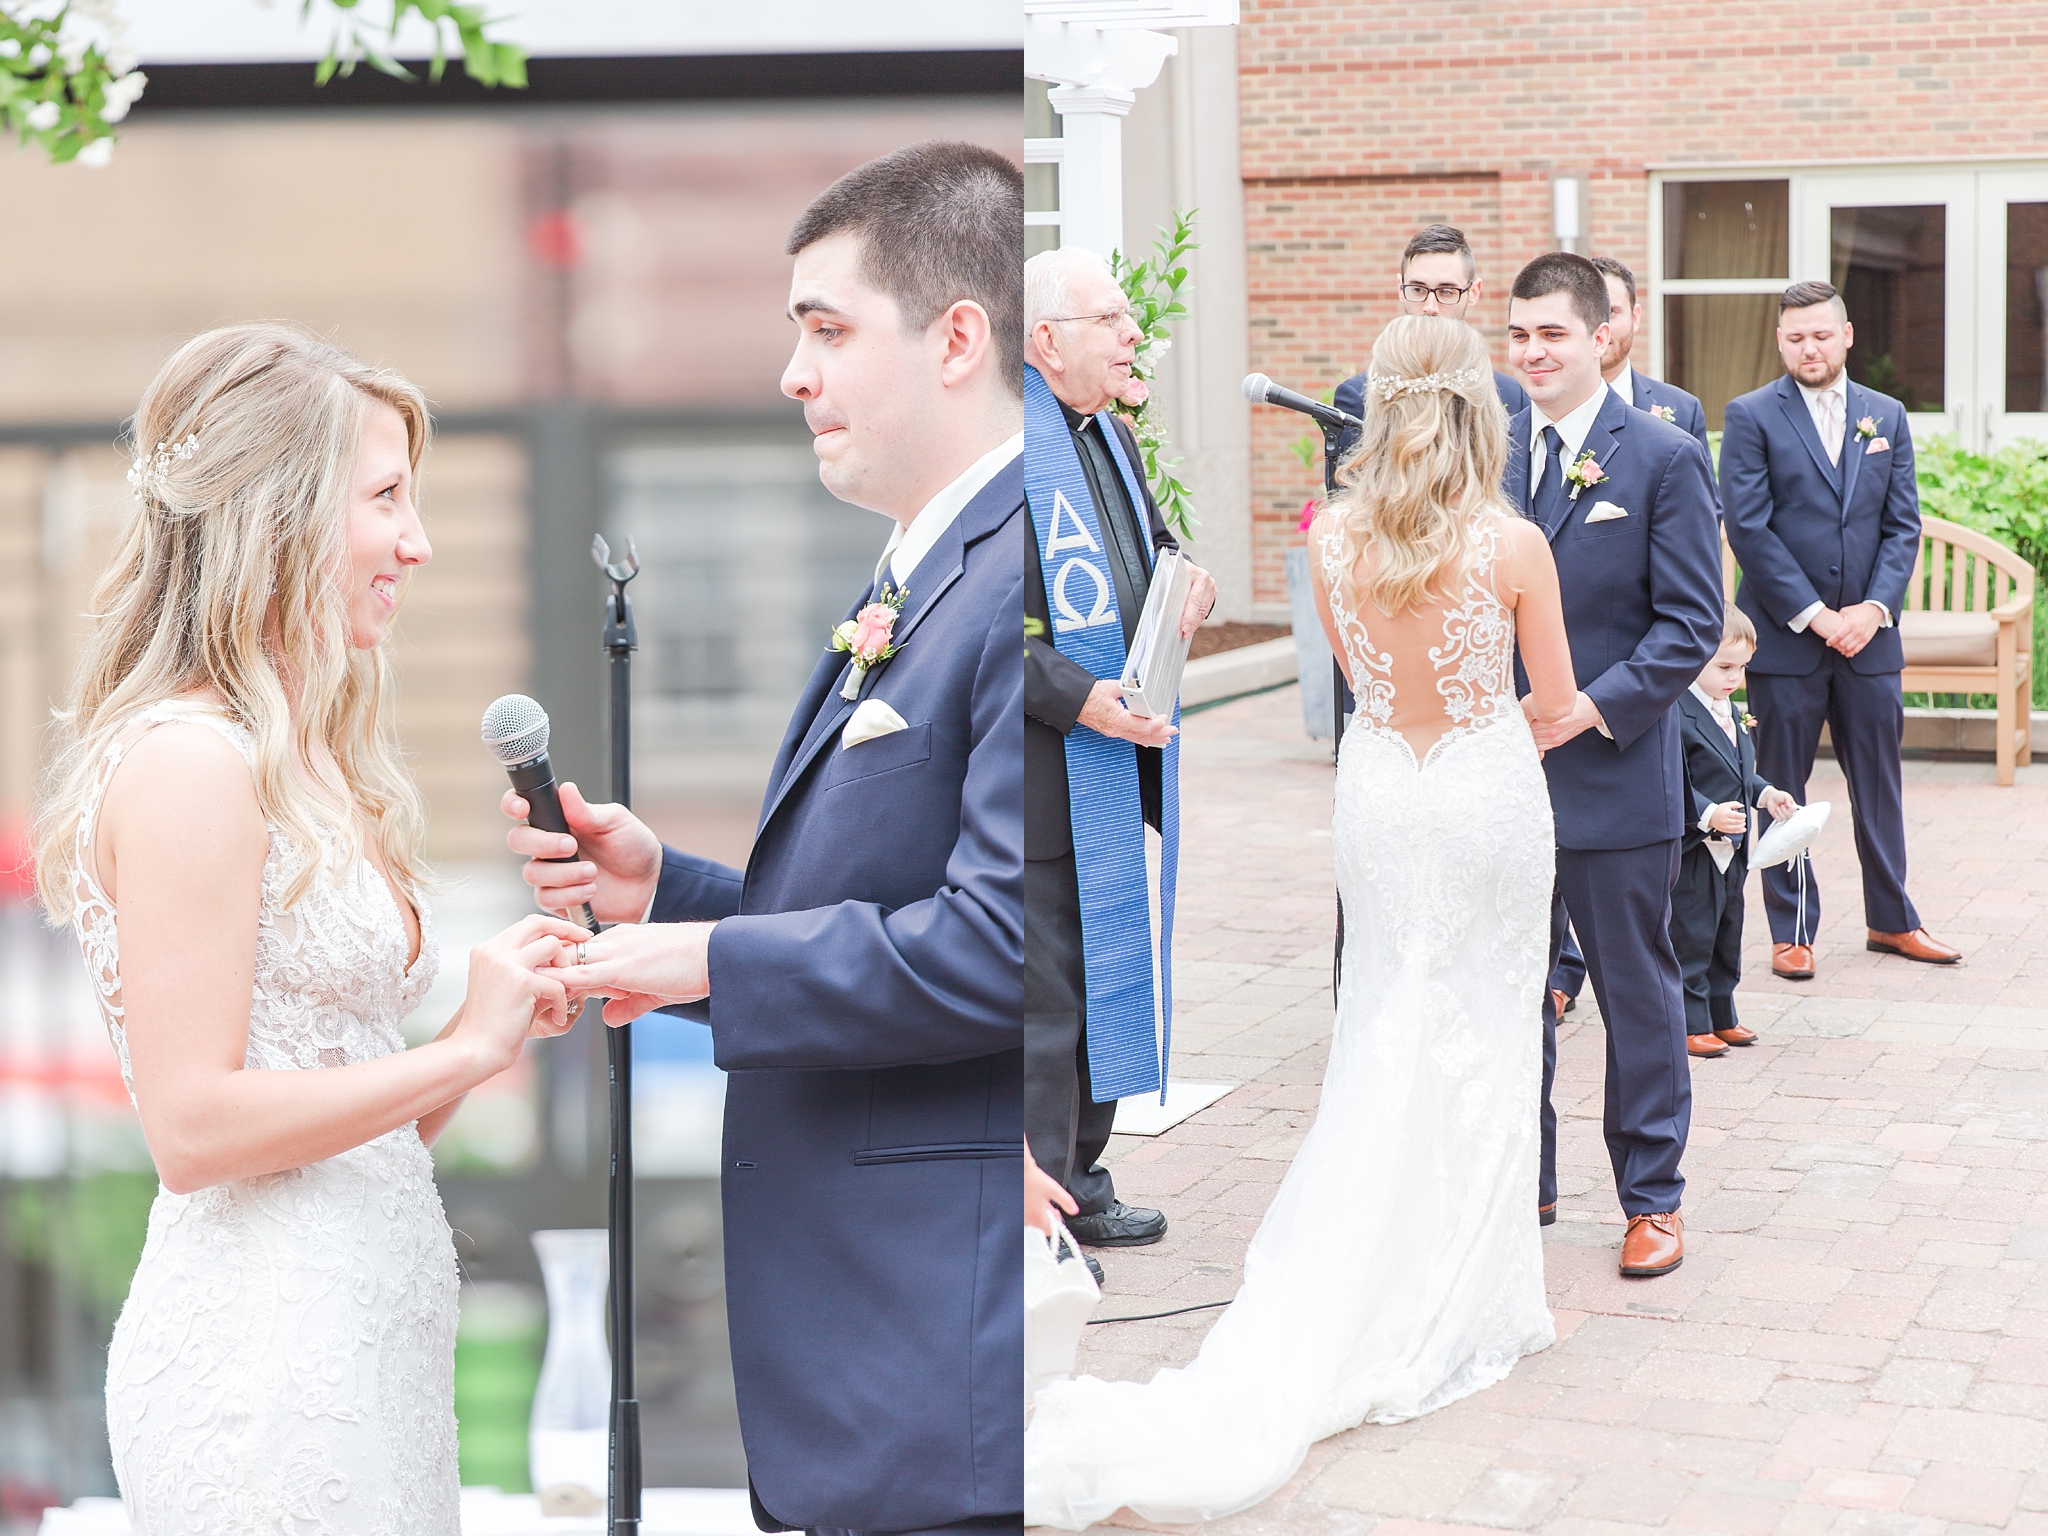 candid-romantic-wedding-photos-at-the-h-hotel-in-midland-michigan-by-courtney-carolyn-photography_0070.jpg